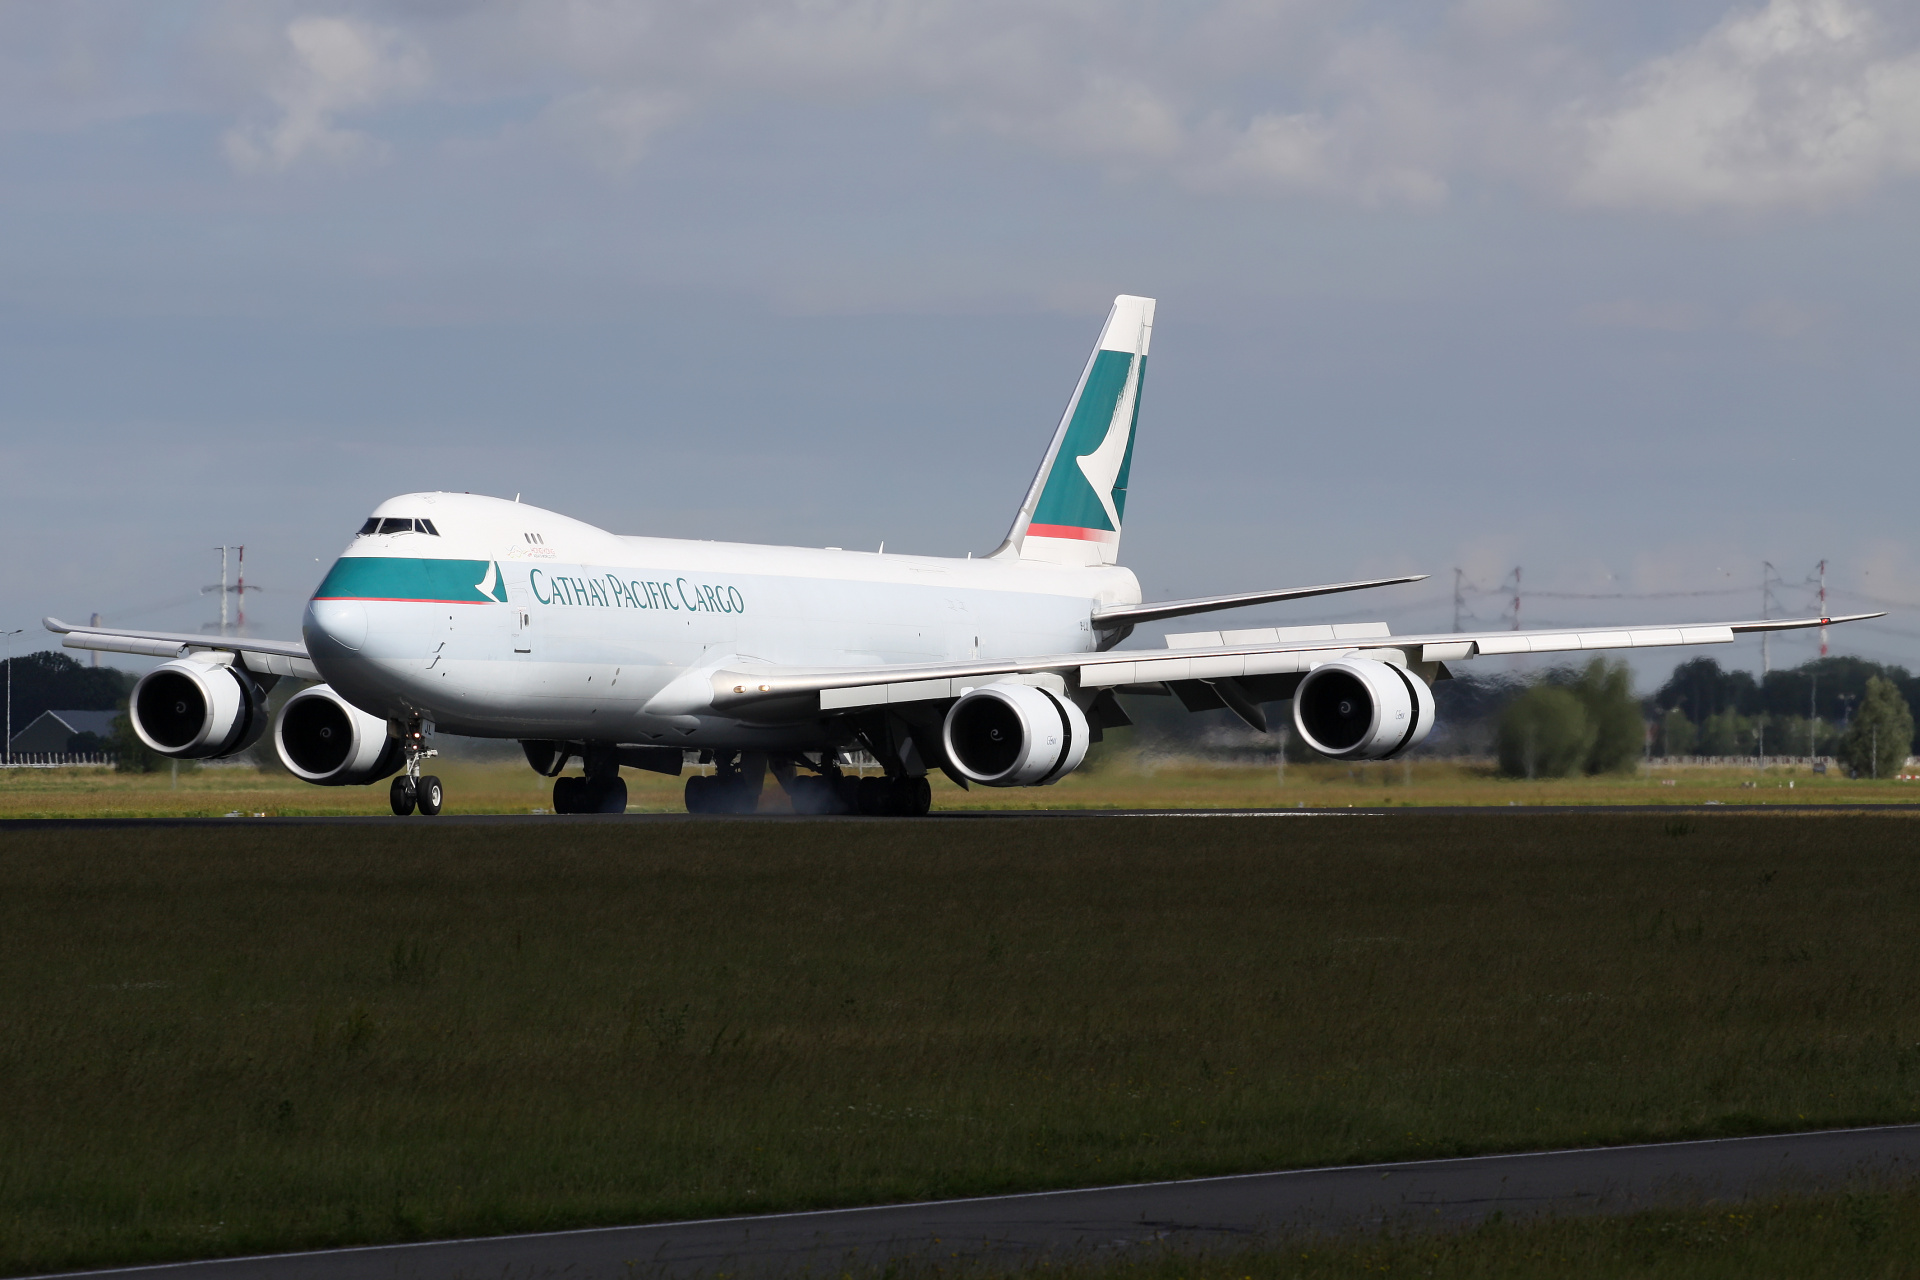 B-LJL, Cathay Pacific Cargo (Aircraft » Schiphol Spotting » Boeing 747-8F)